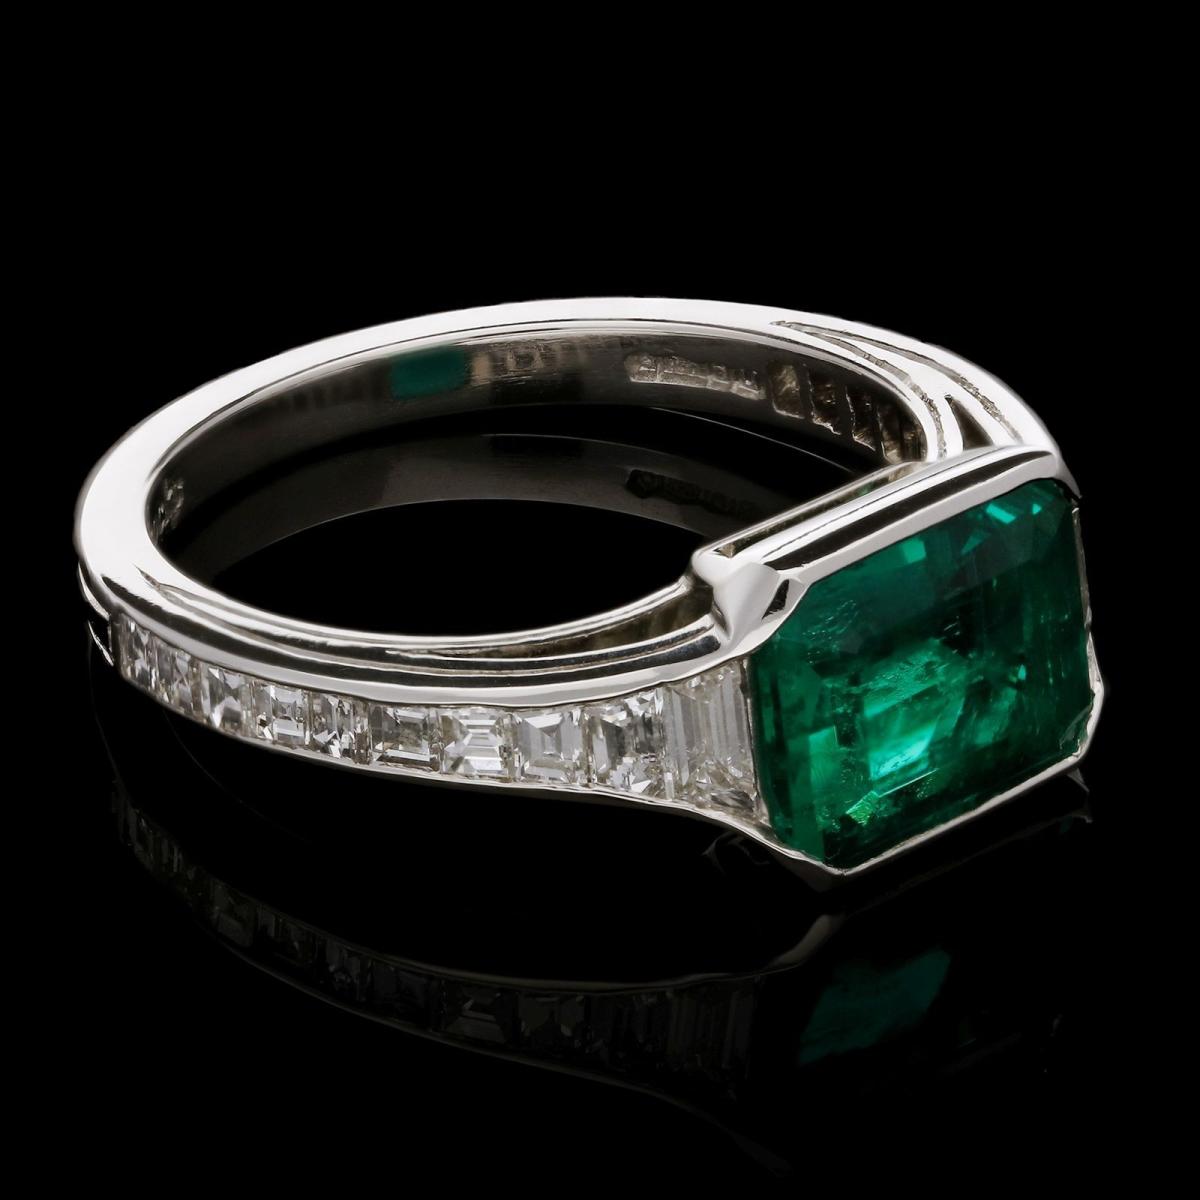 An elegant Colombian emerald ring set in platinum with calibre step-cut diamond shoulders